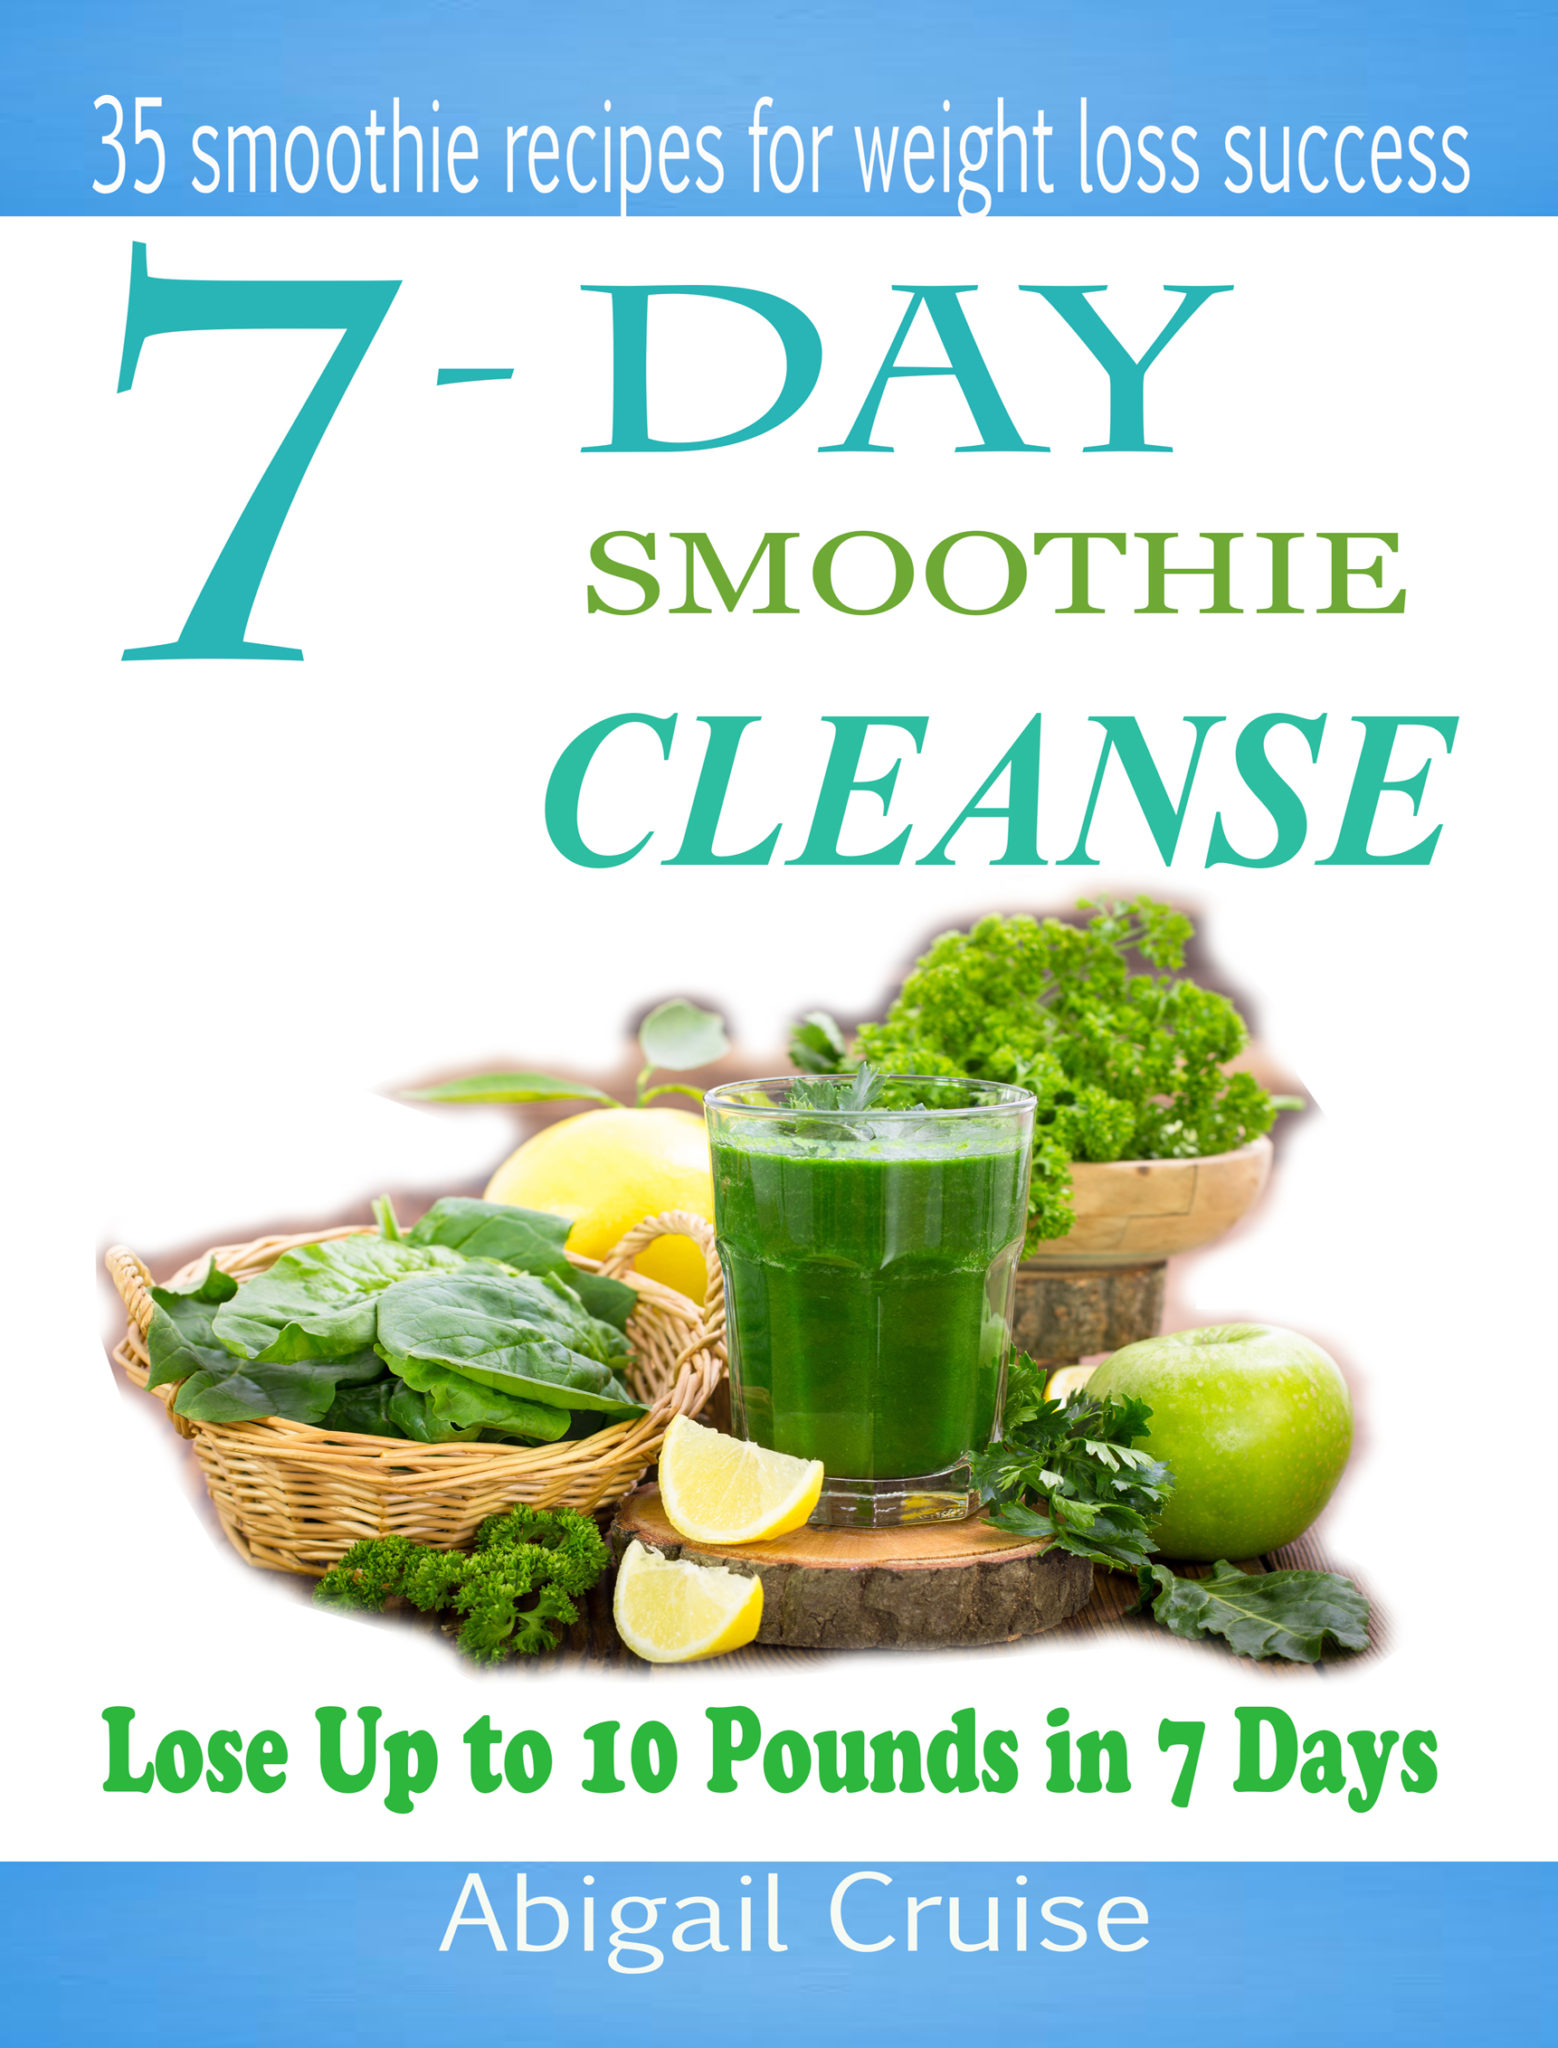 FREE: 7-Day Smoothie Cleanse: 35 Smoothie Recipes for Weight Loss Success! by Abigail Cruise